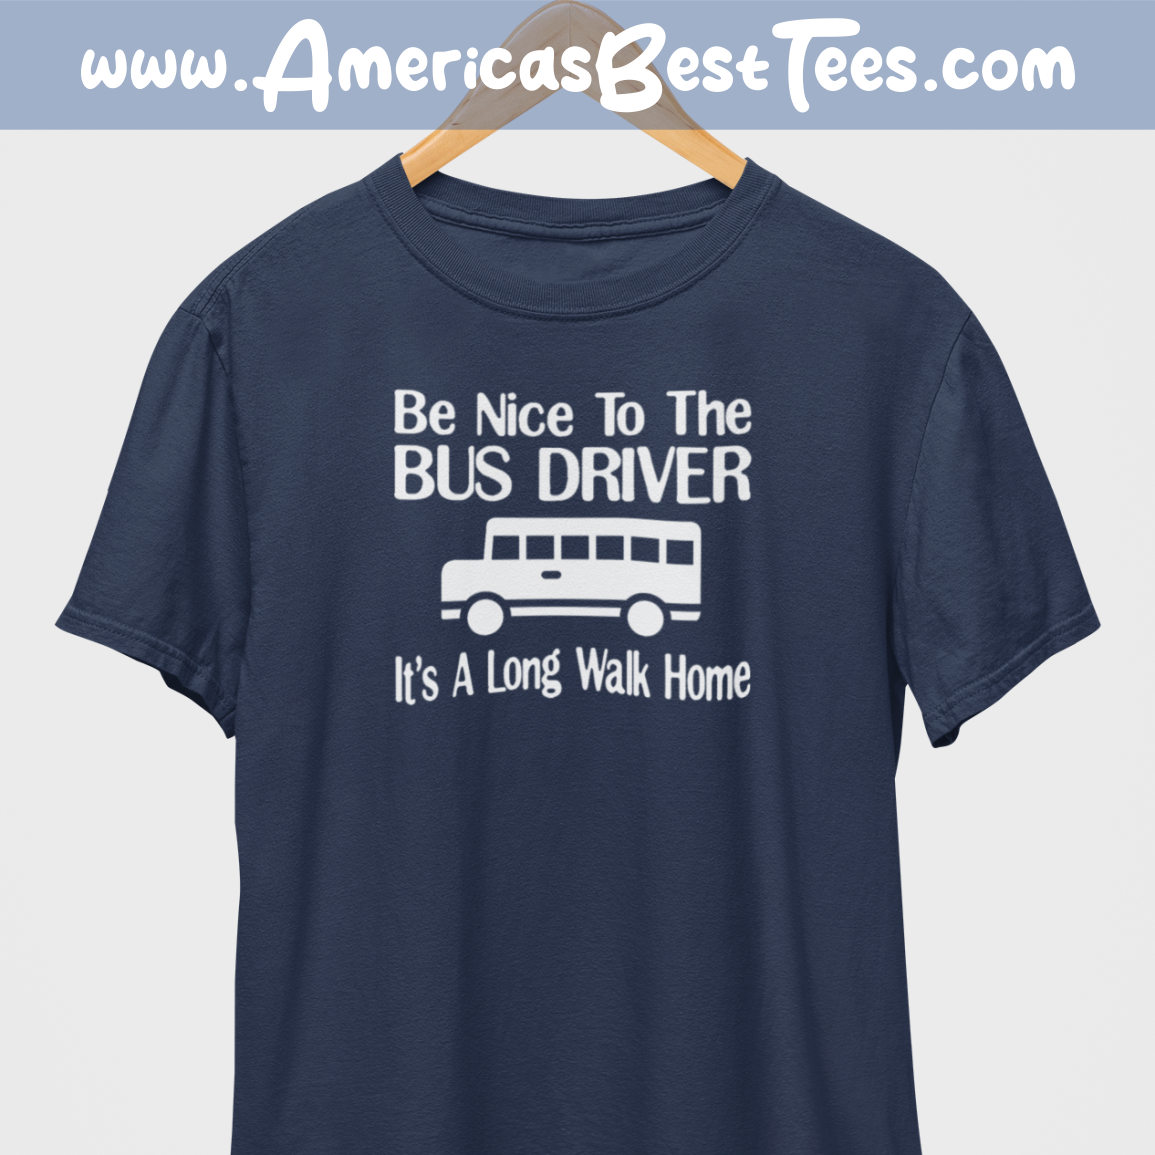 Be Nice To The Bus Driver White Print T-Shirt